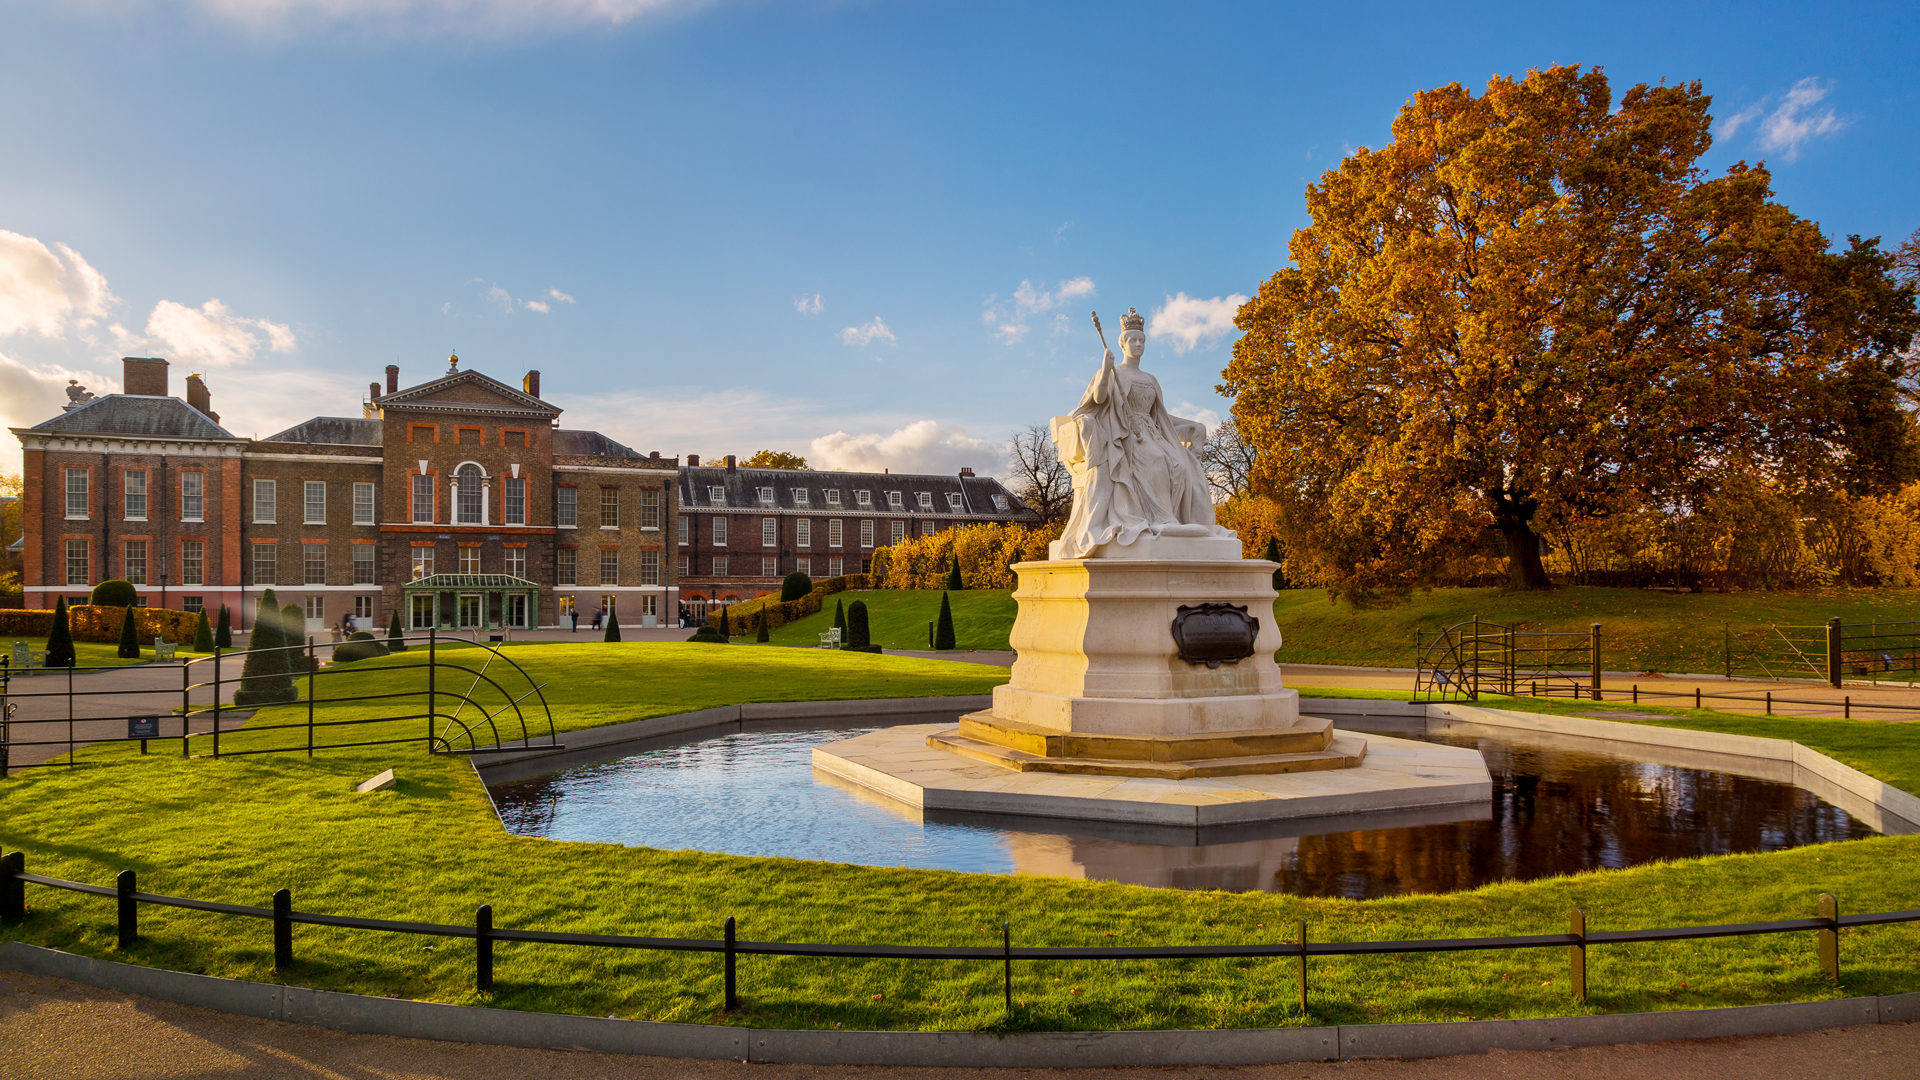 Queen Victoria statue in Kensington Gardens, with tree with autumn leaves, and Kensington Palace in the background